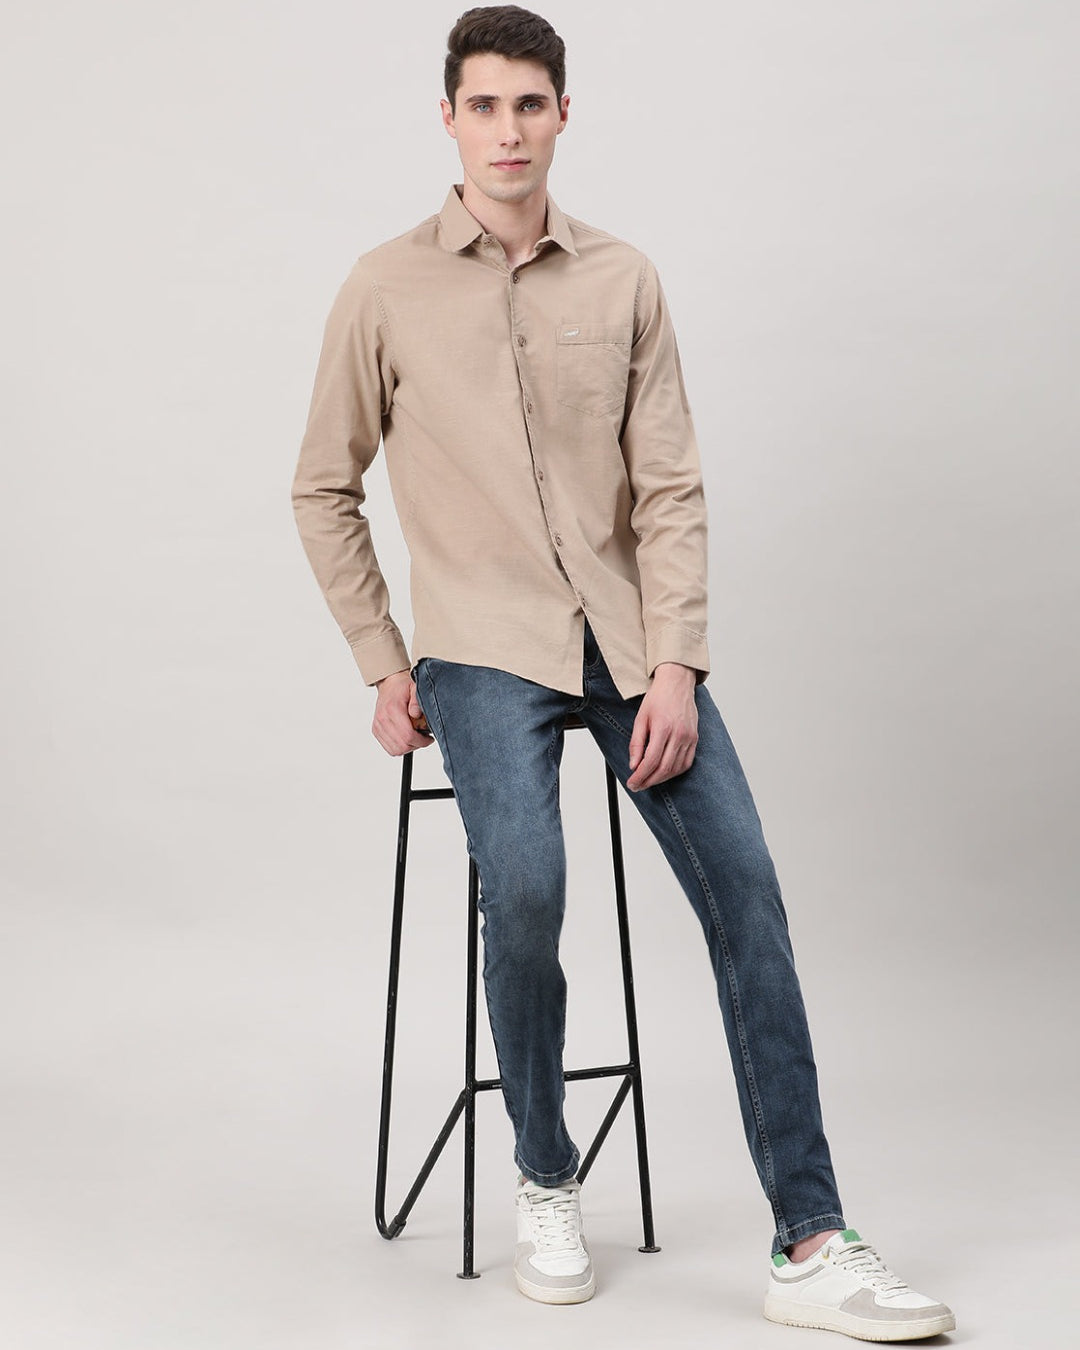 Crocodile Casual Full Sleeve Comfort Fit Solid Shirt Khaki with Collar